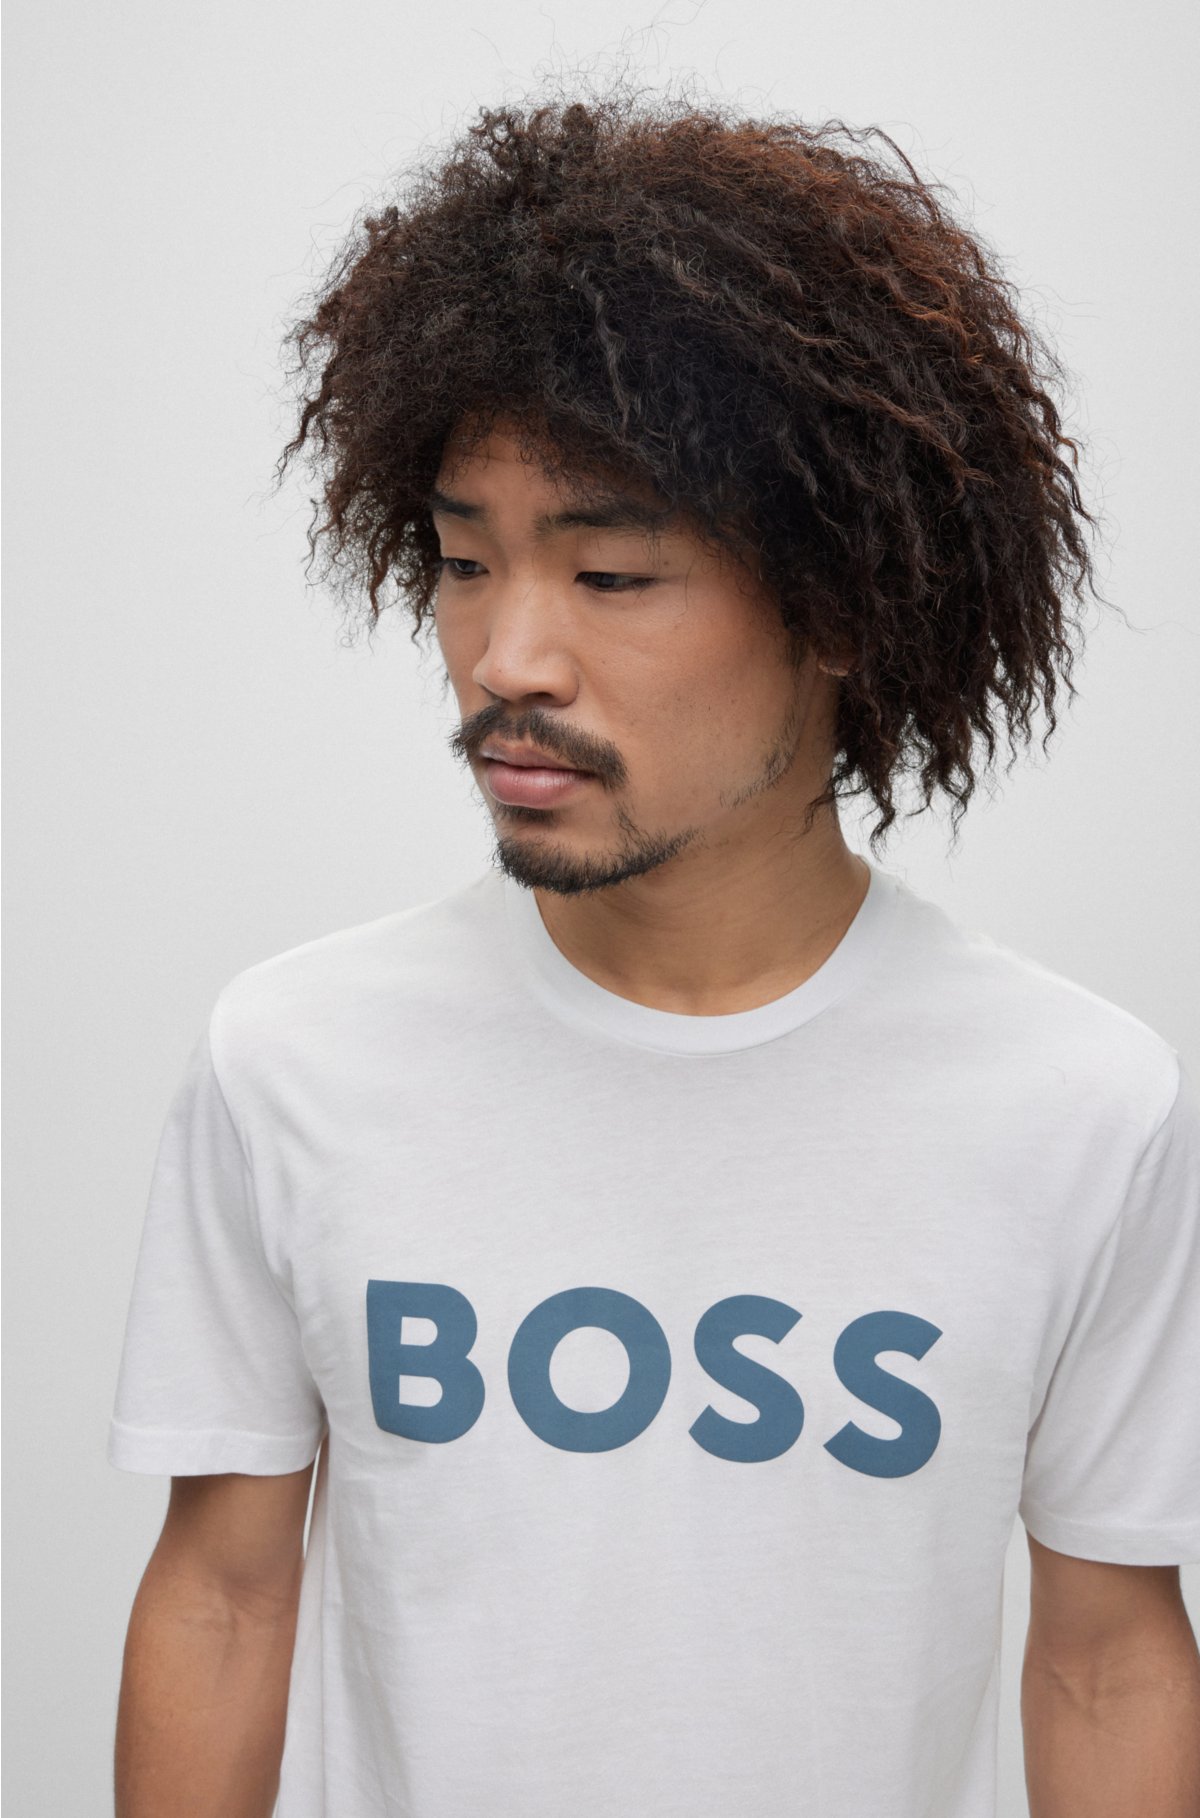 BOSS - Cotton-jersey with rubber-print logo